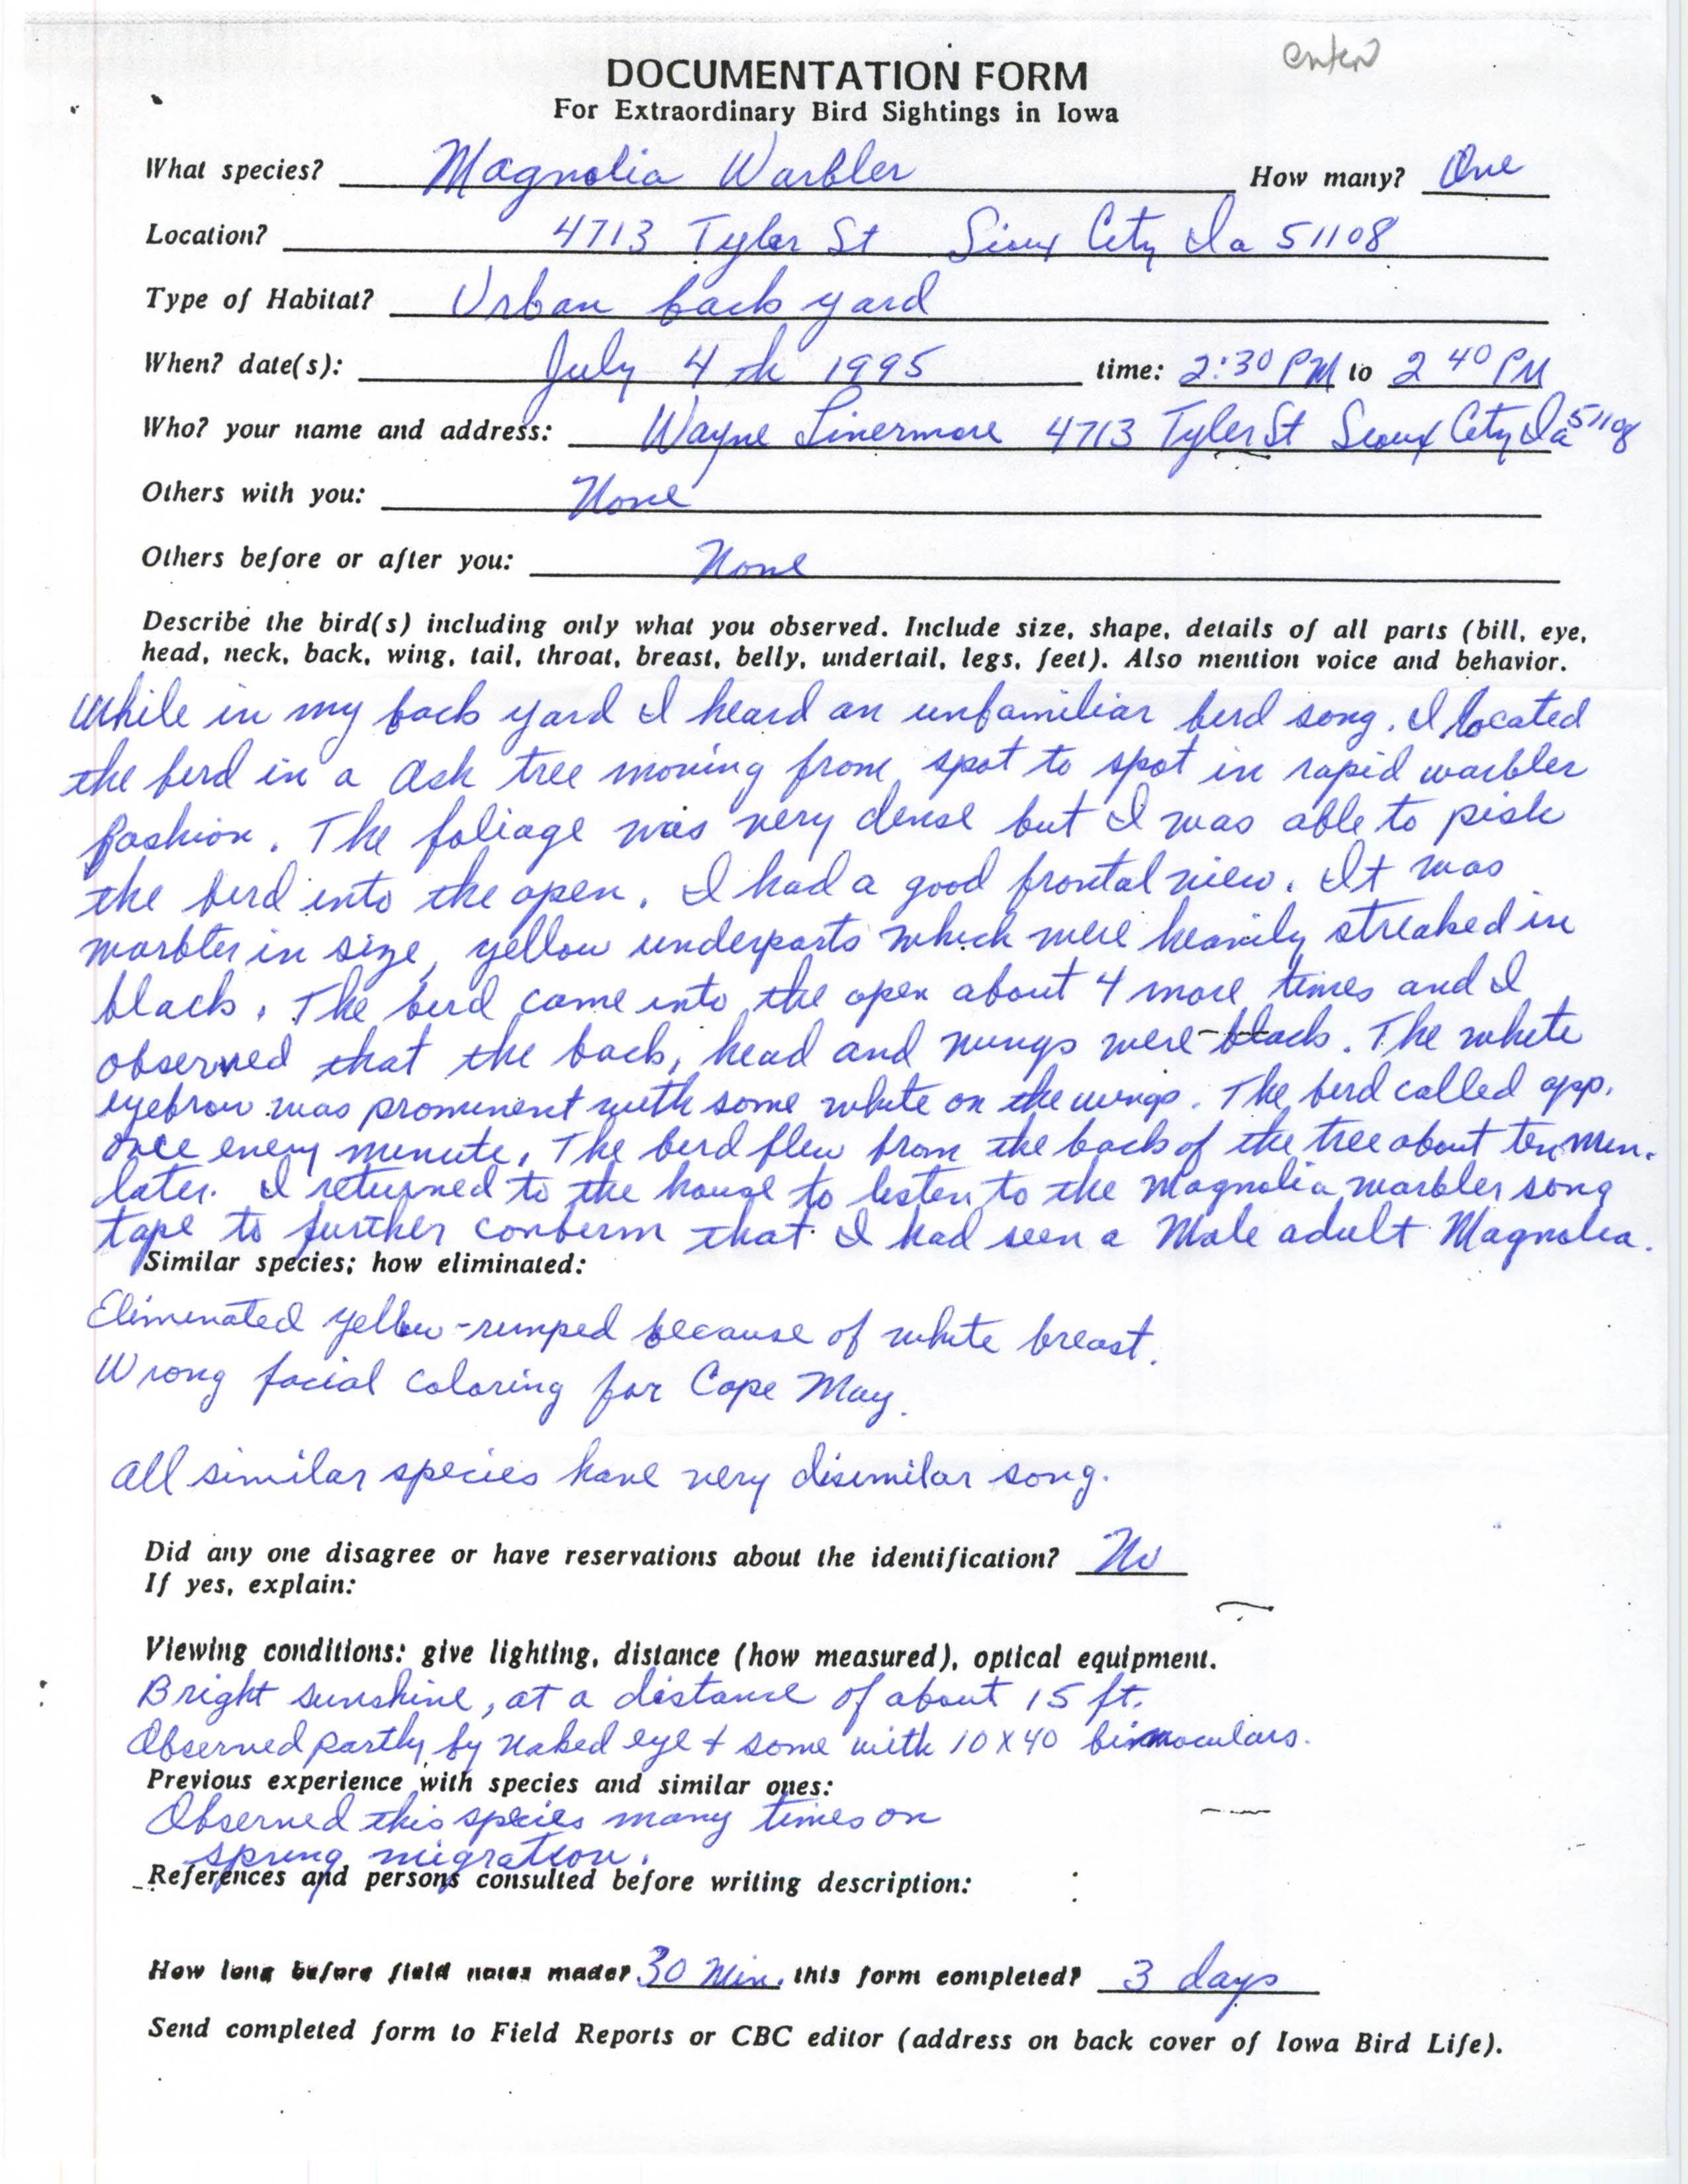 Rare bird documentation form for Magnolia Warbler at Sioux City, 1995